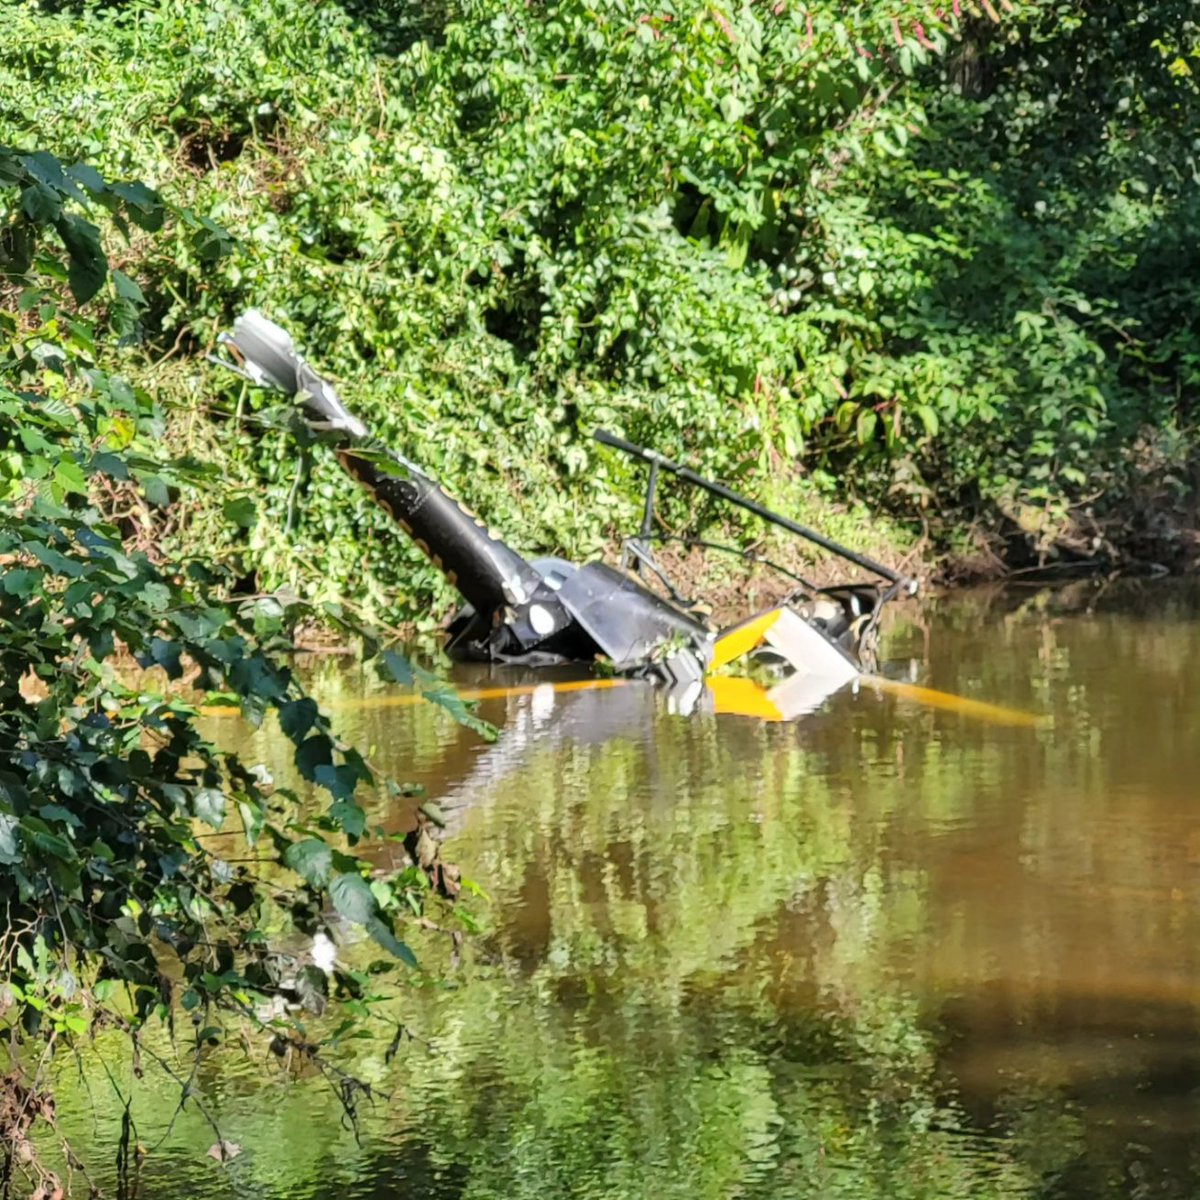 Pilot Killed in South Brunswick Helicopter Crash Has Been...